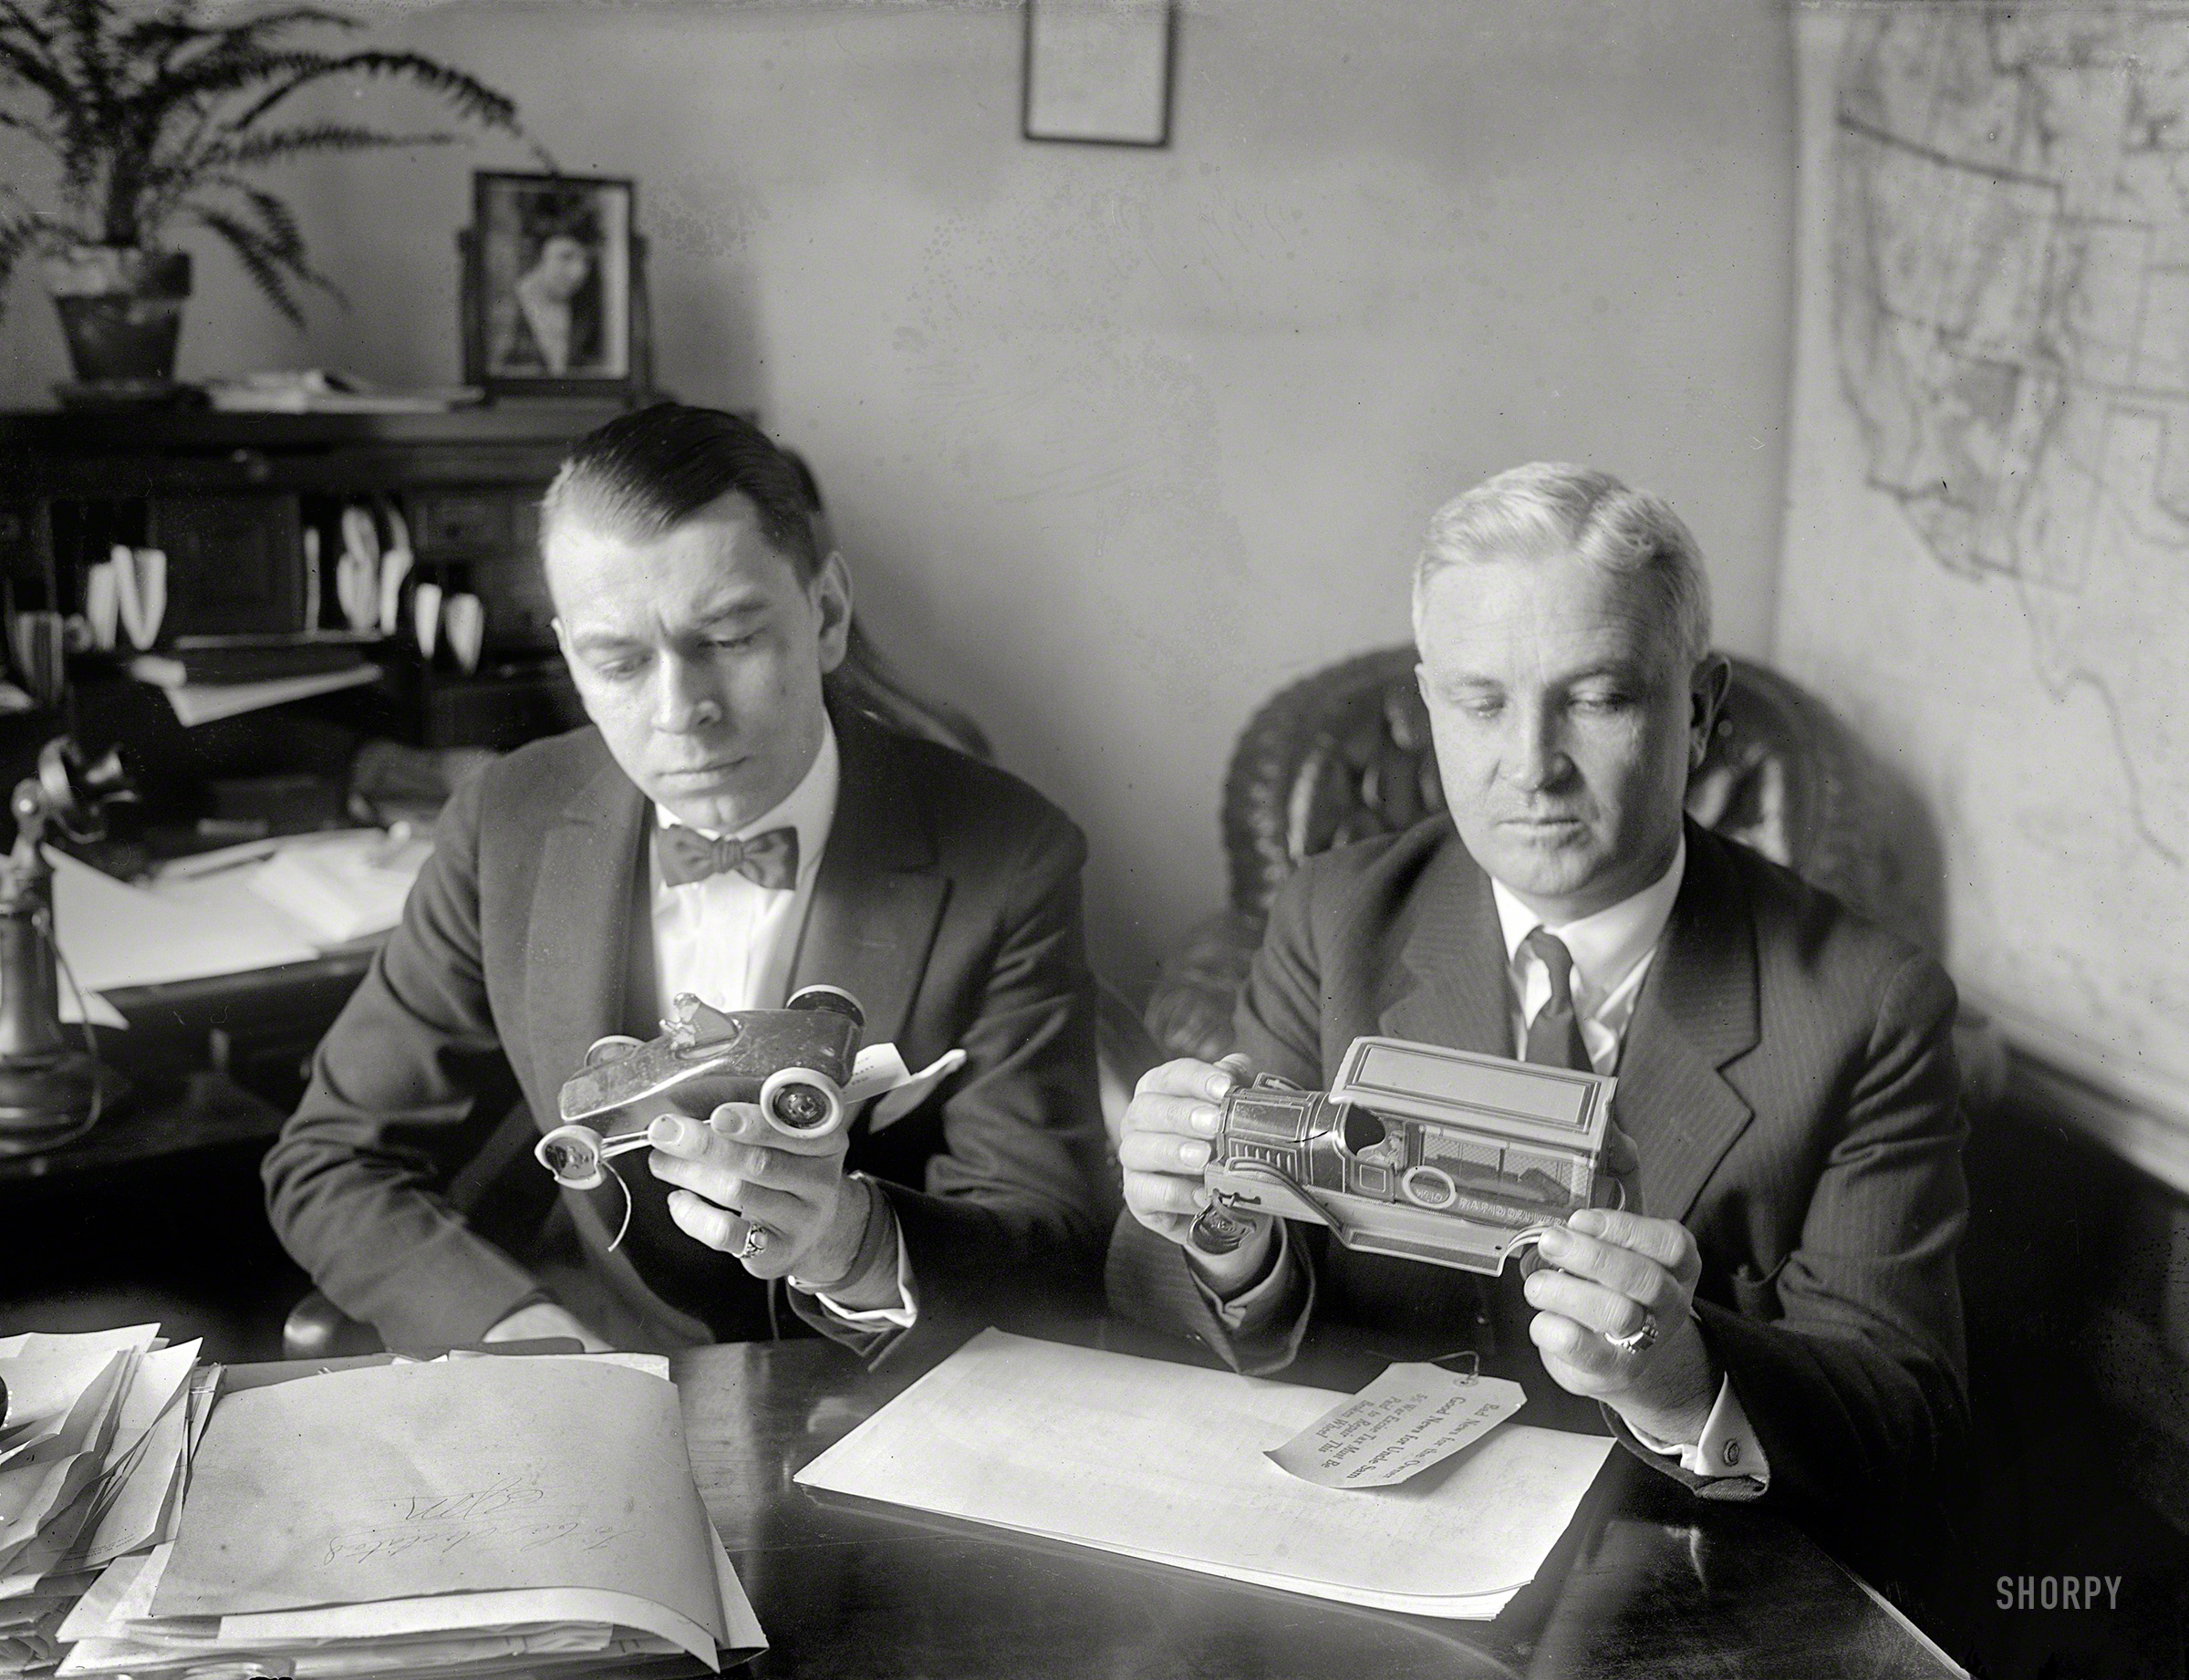 February 21, 1924. Washington, D.C. "McLeod & Robt. M. Clancy." So what's going on here? National Photo Company Collection glass negative. View full size.